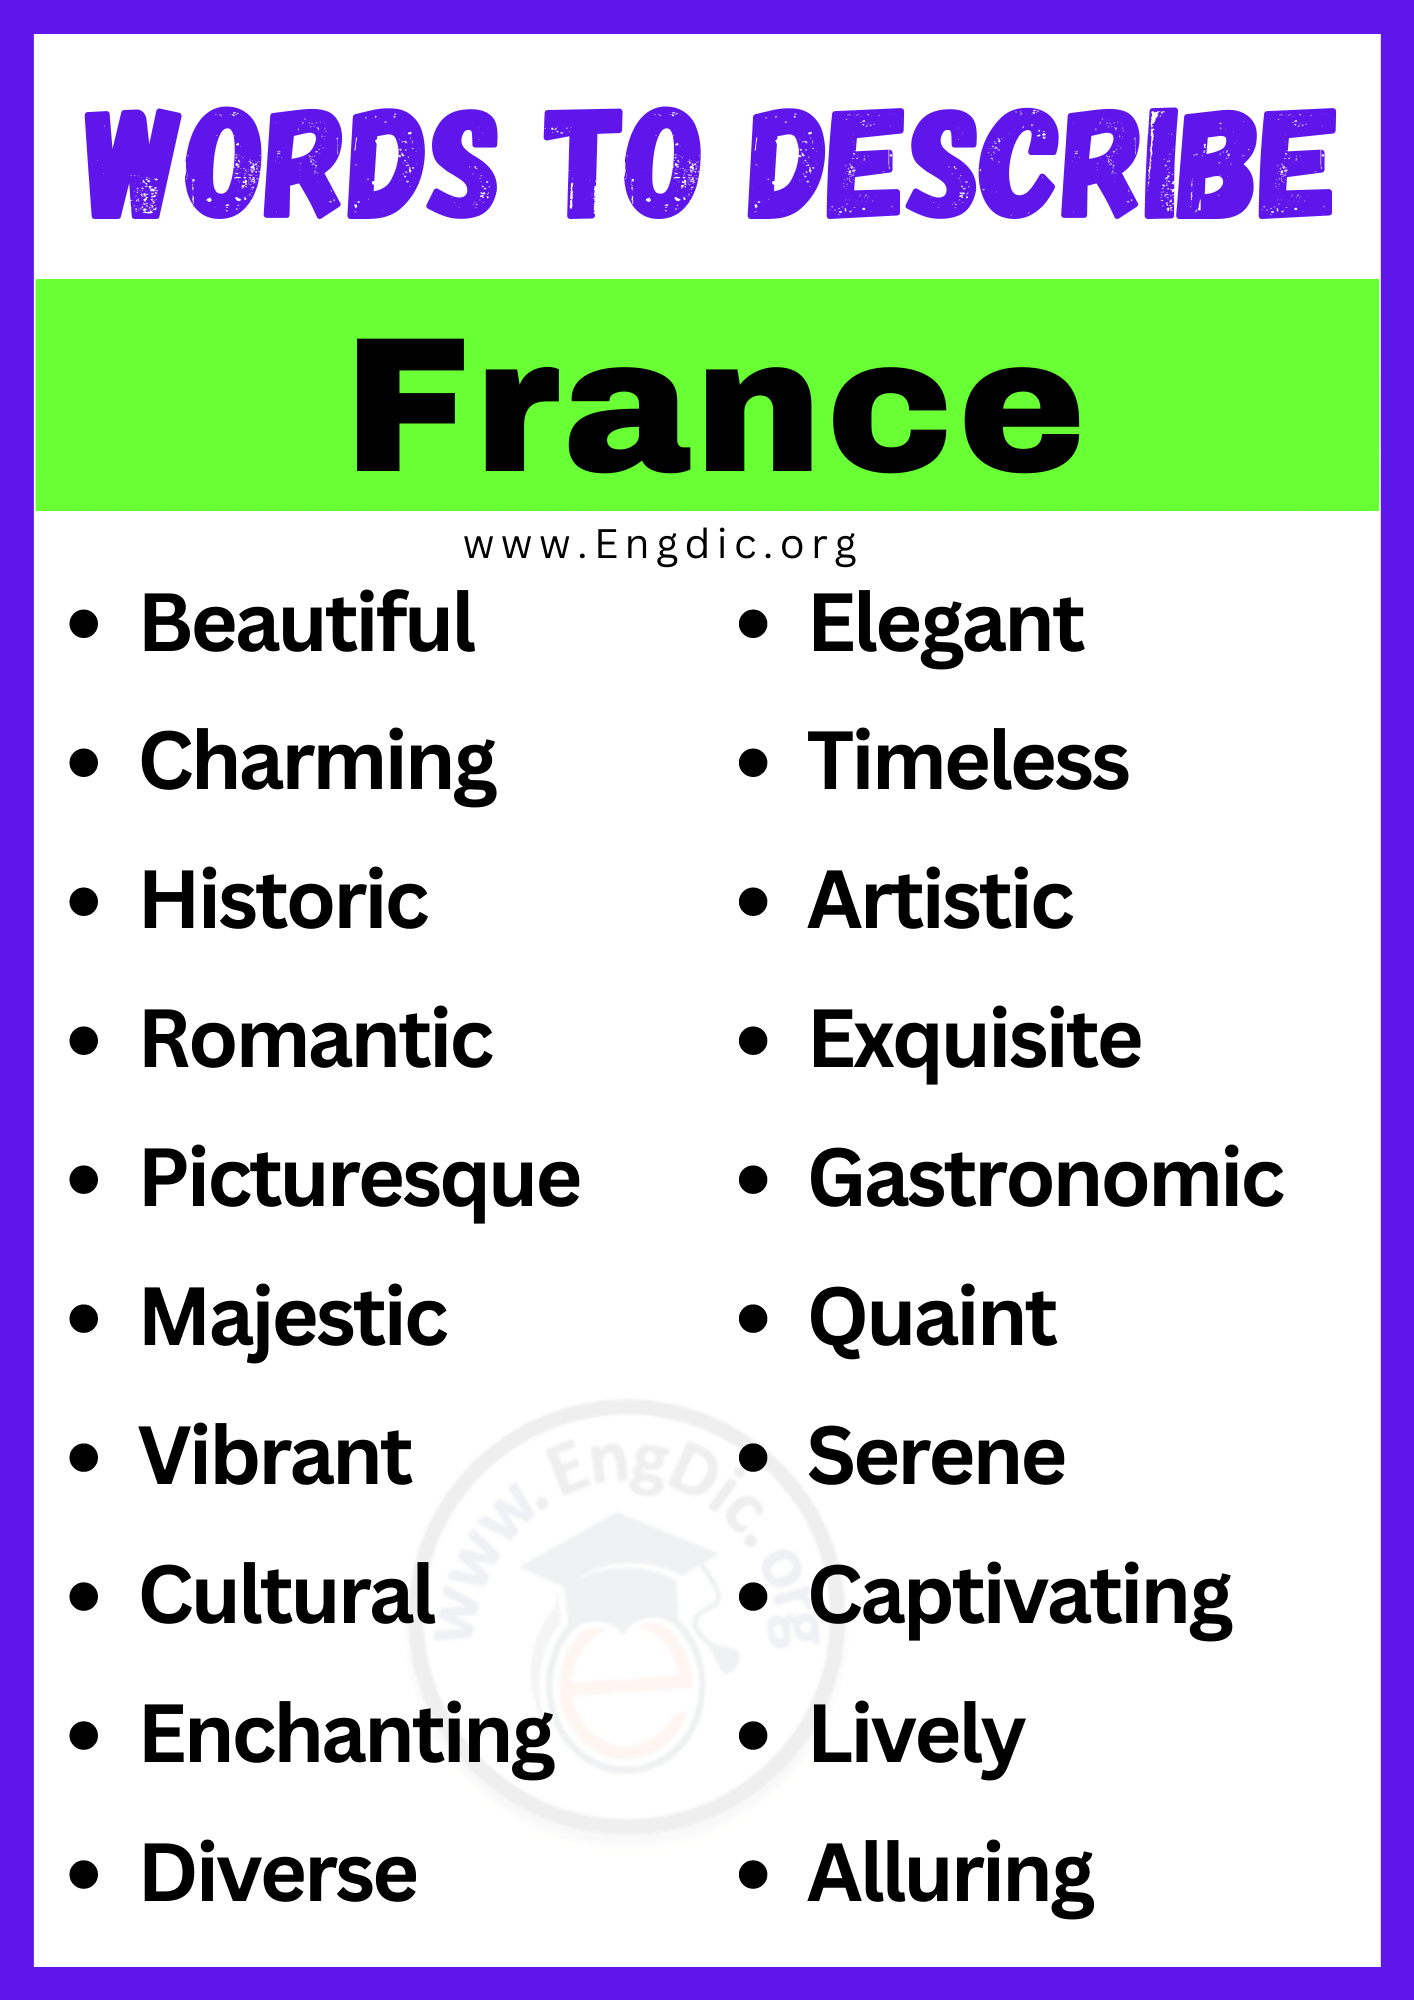 Words to Describe France, adjectives for france